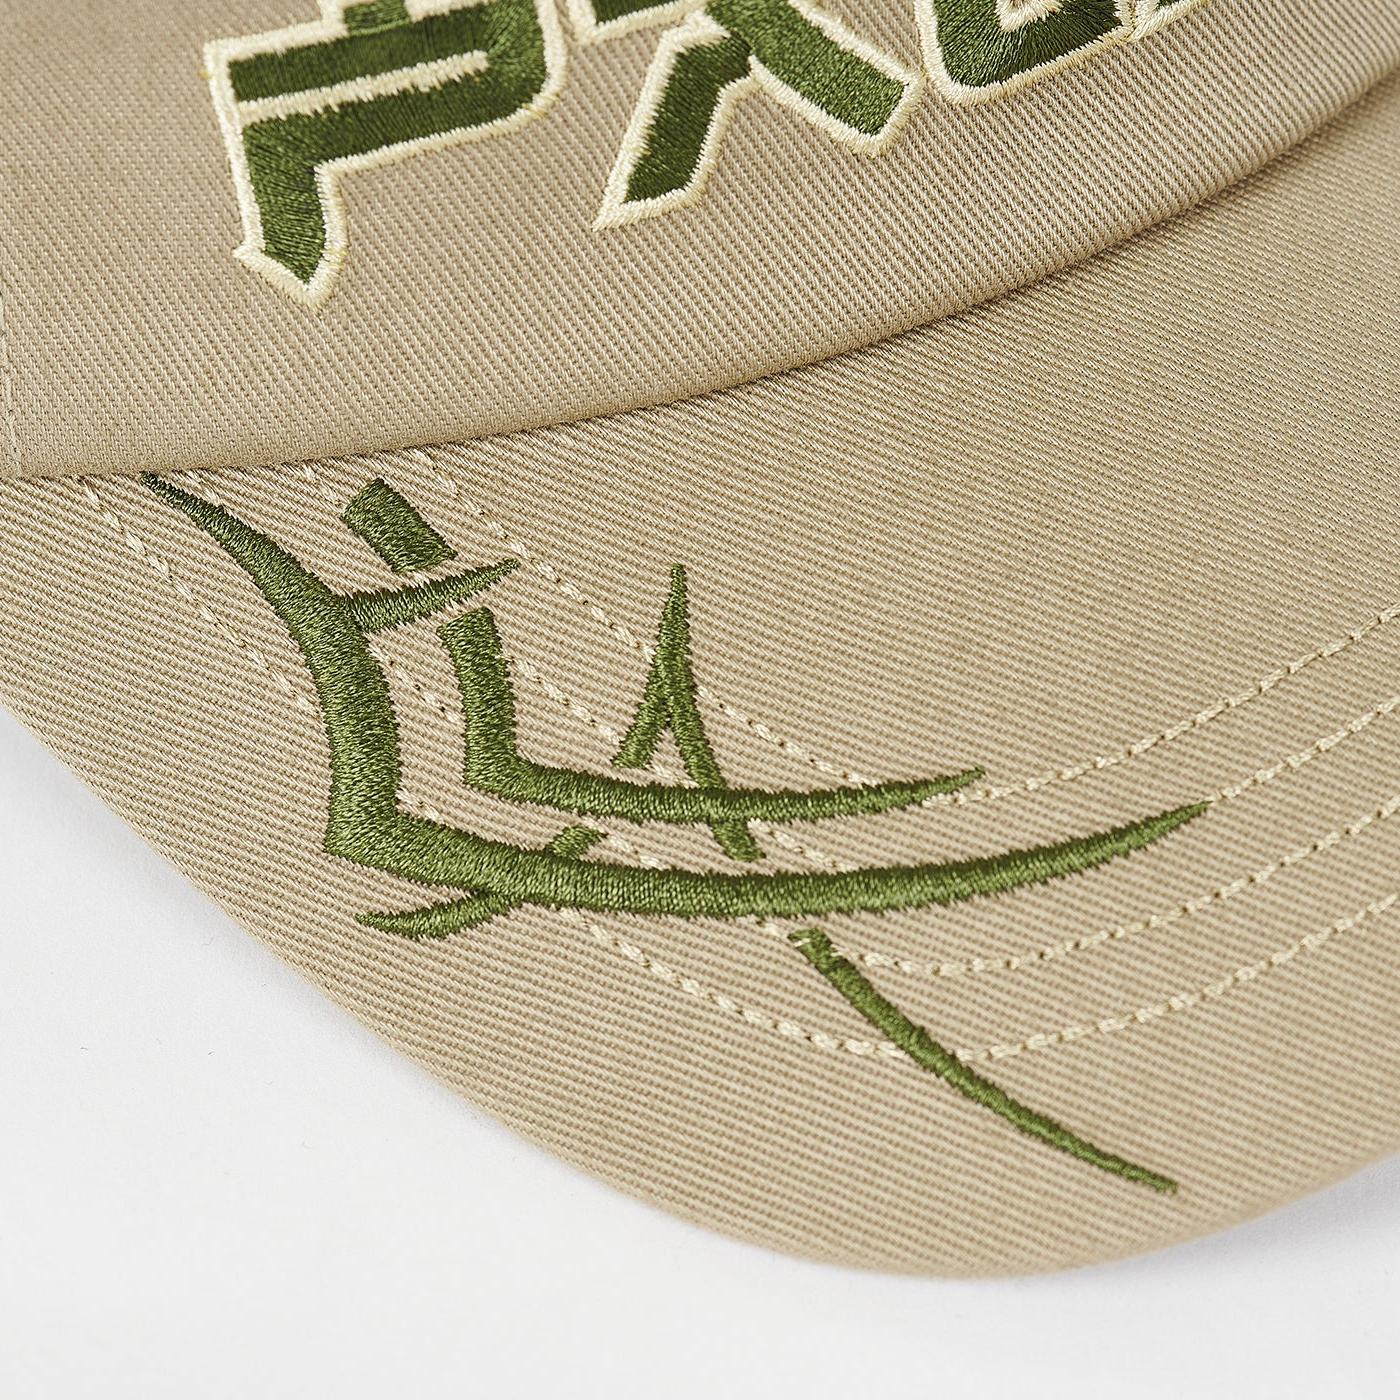 Thumbnail TRIBAL TRUCKER HAT STONE one color